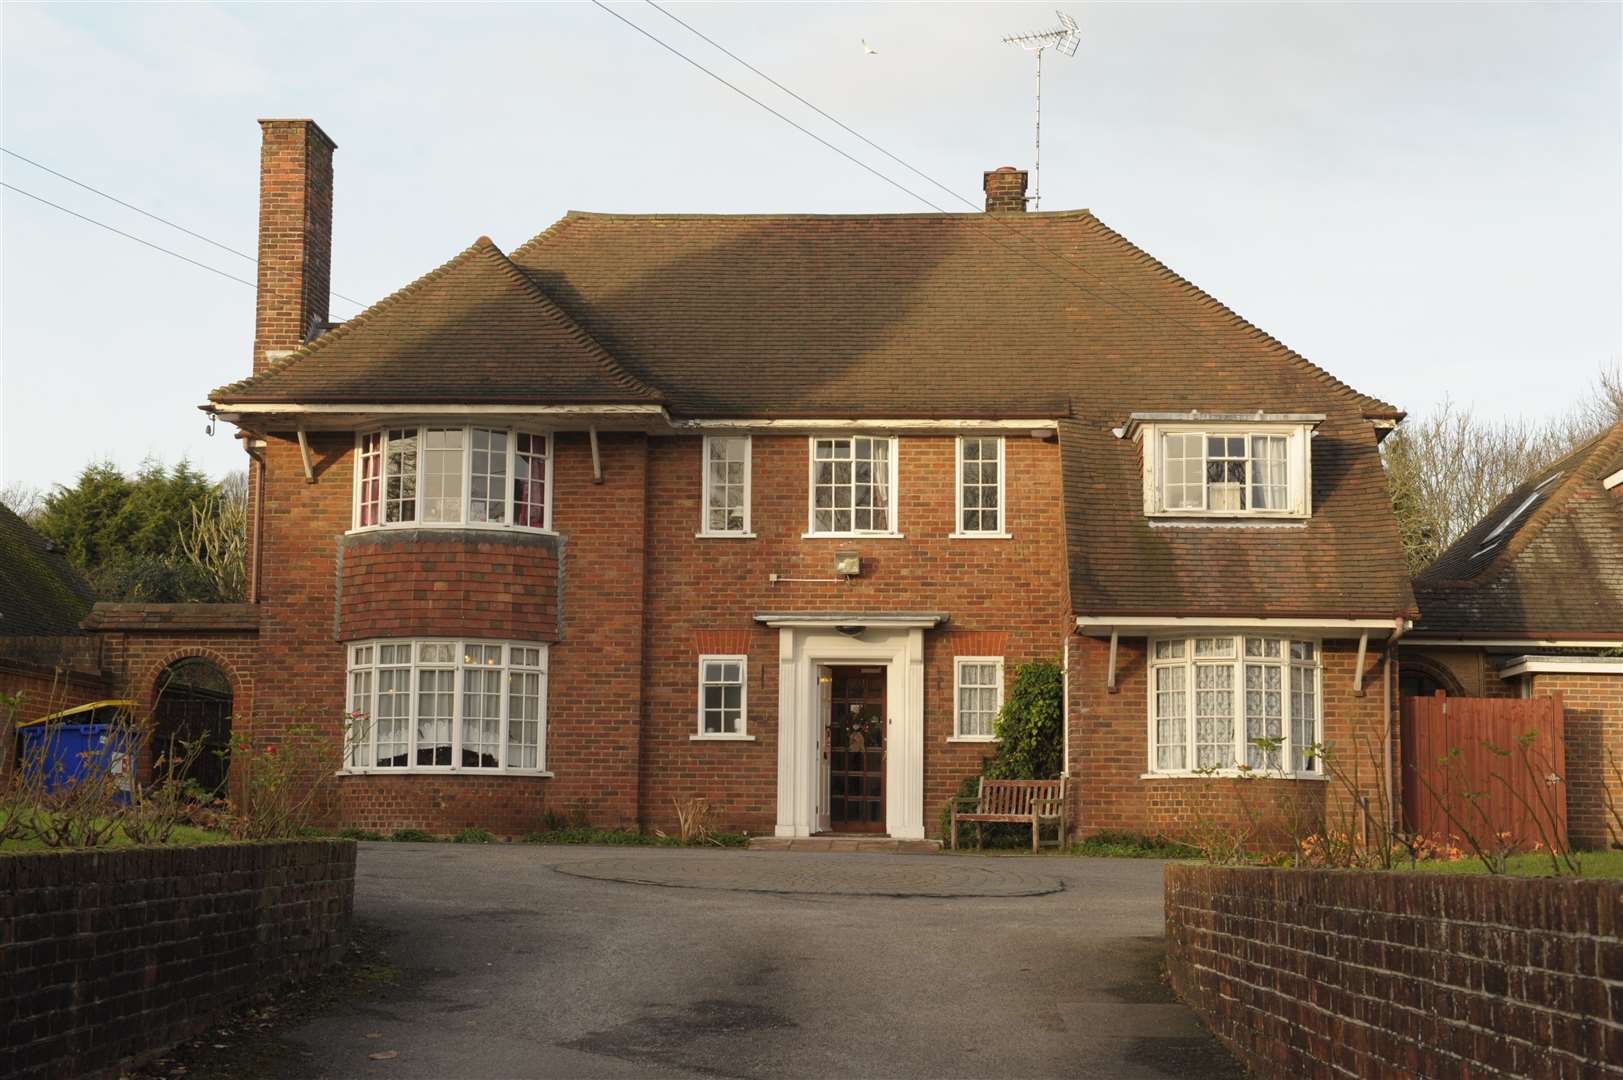 Cherry Acre Residential Home Berengrave Lane,